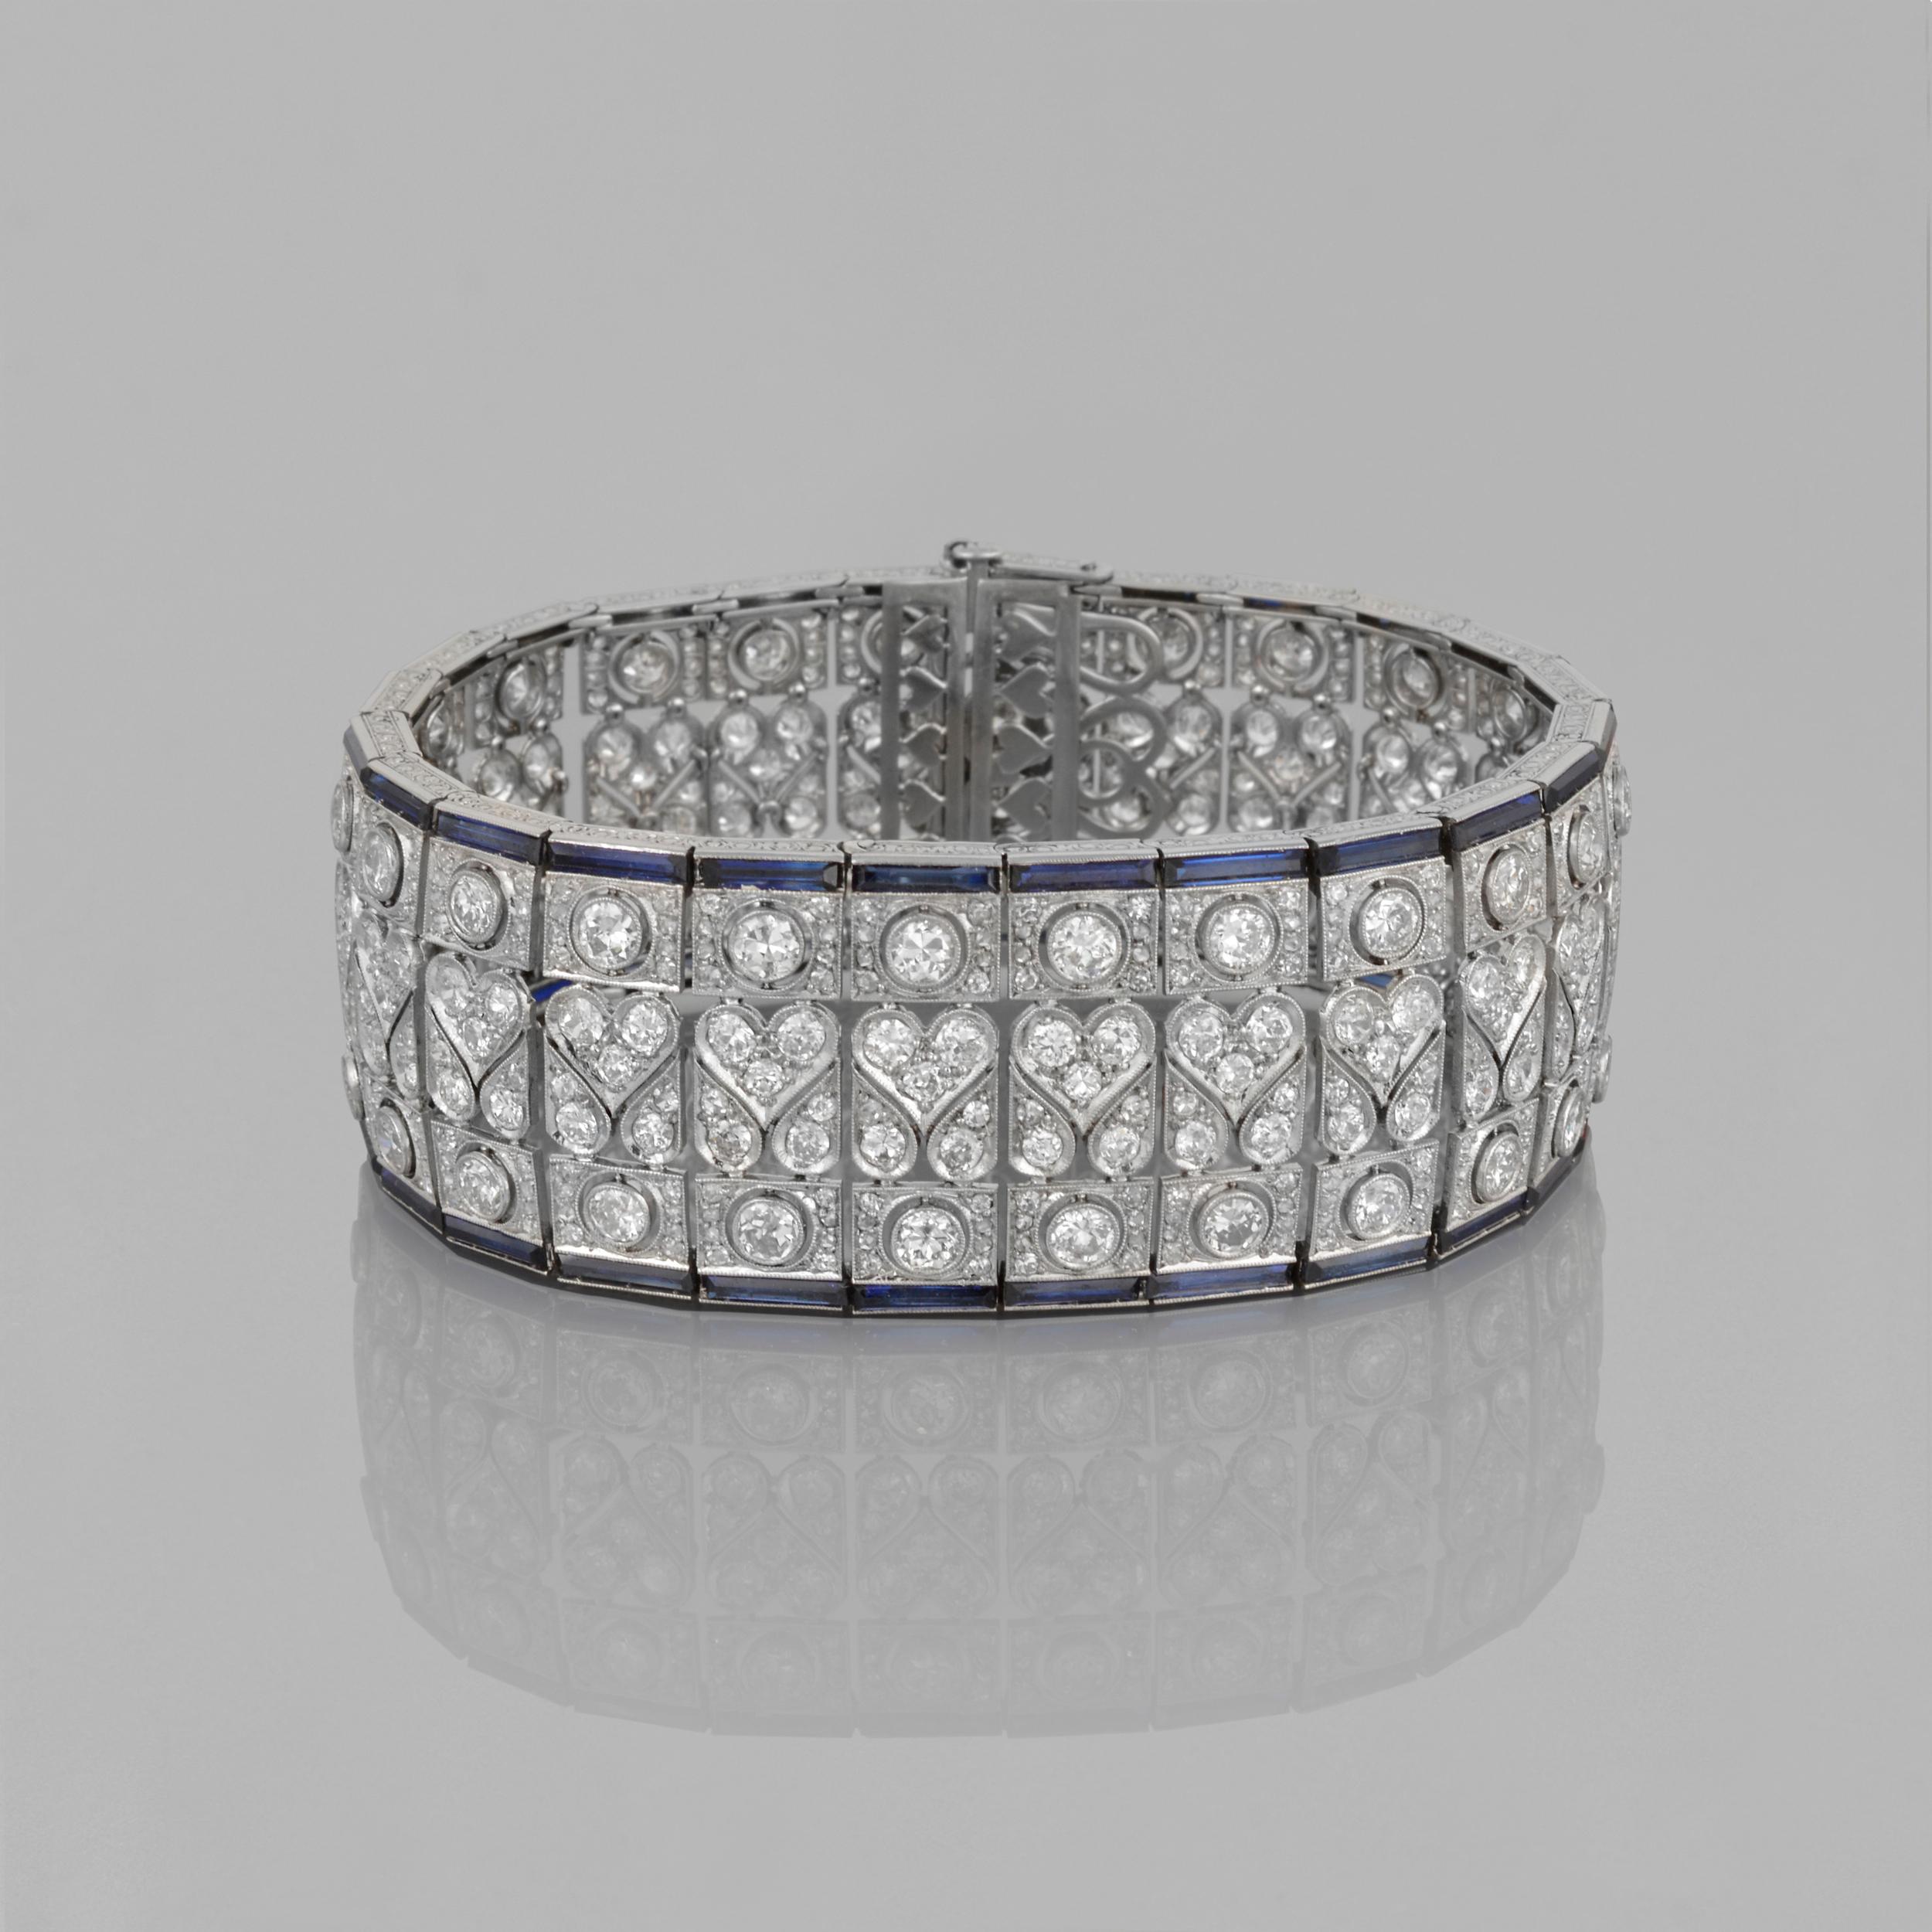 This stunning bracelet is from France and was made during the Art Deco period. It is a wide articulated band with a stunning open work geometric design. It is a milgrain circular set with single cut diamonds. The band edges are made with calibre-cut